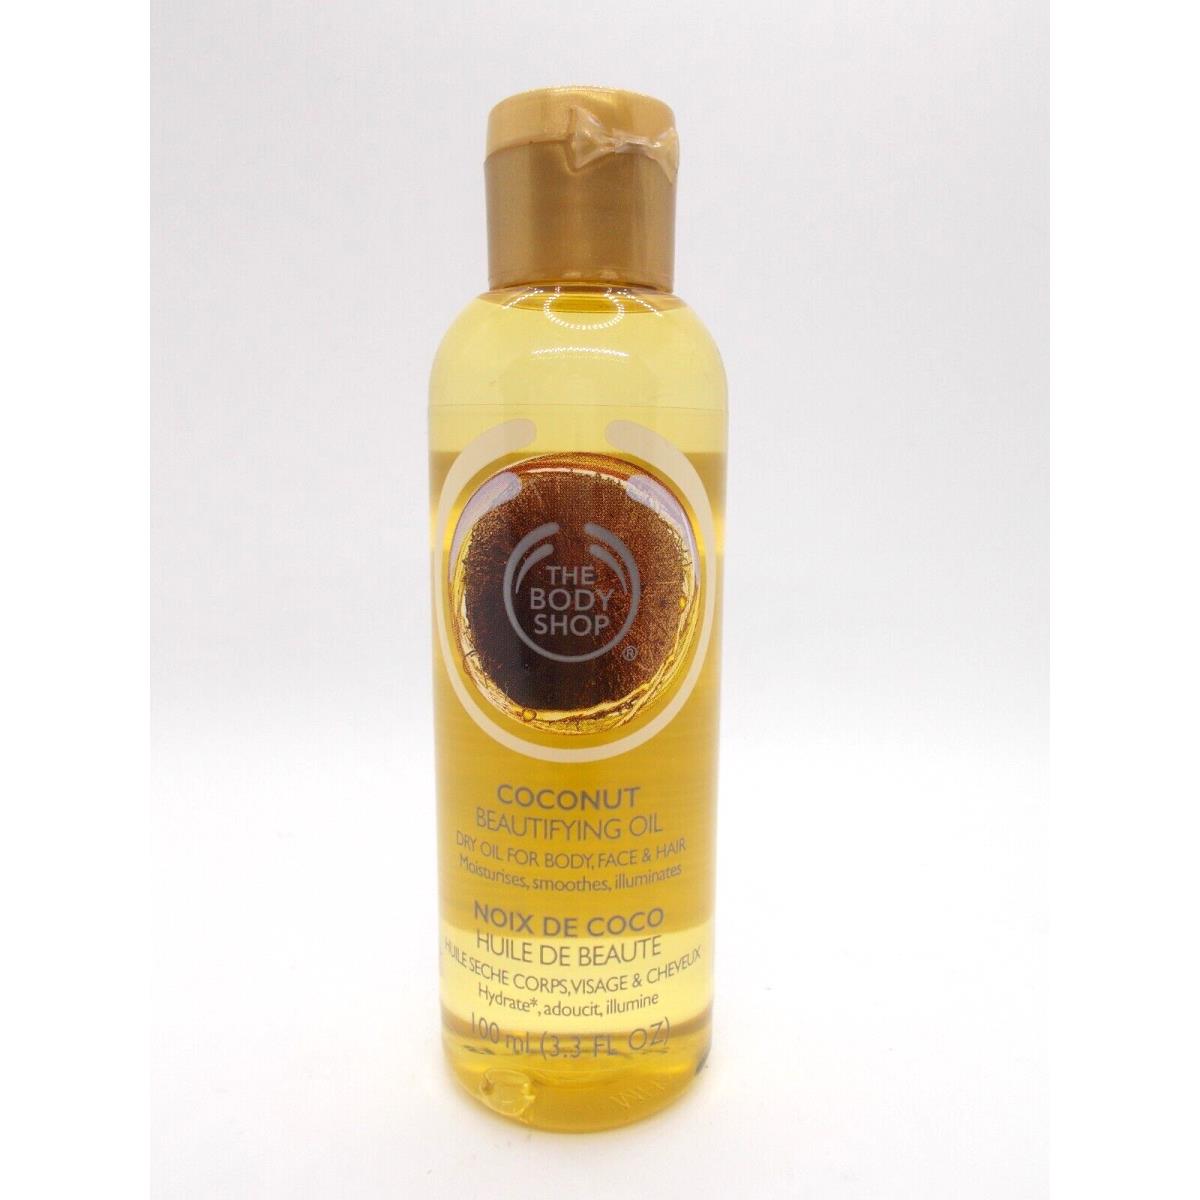 The Body Shop Coconut Beautifying Dry Oil 3.3 Ounce Bottle